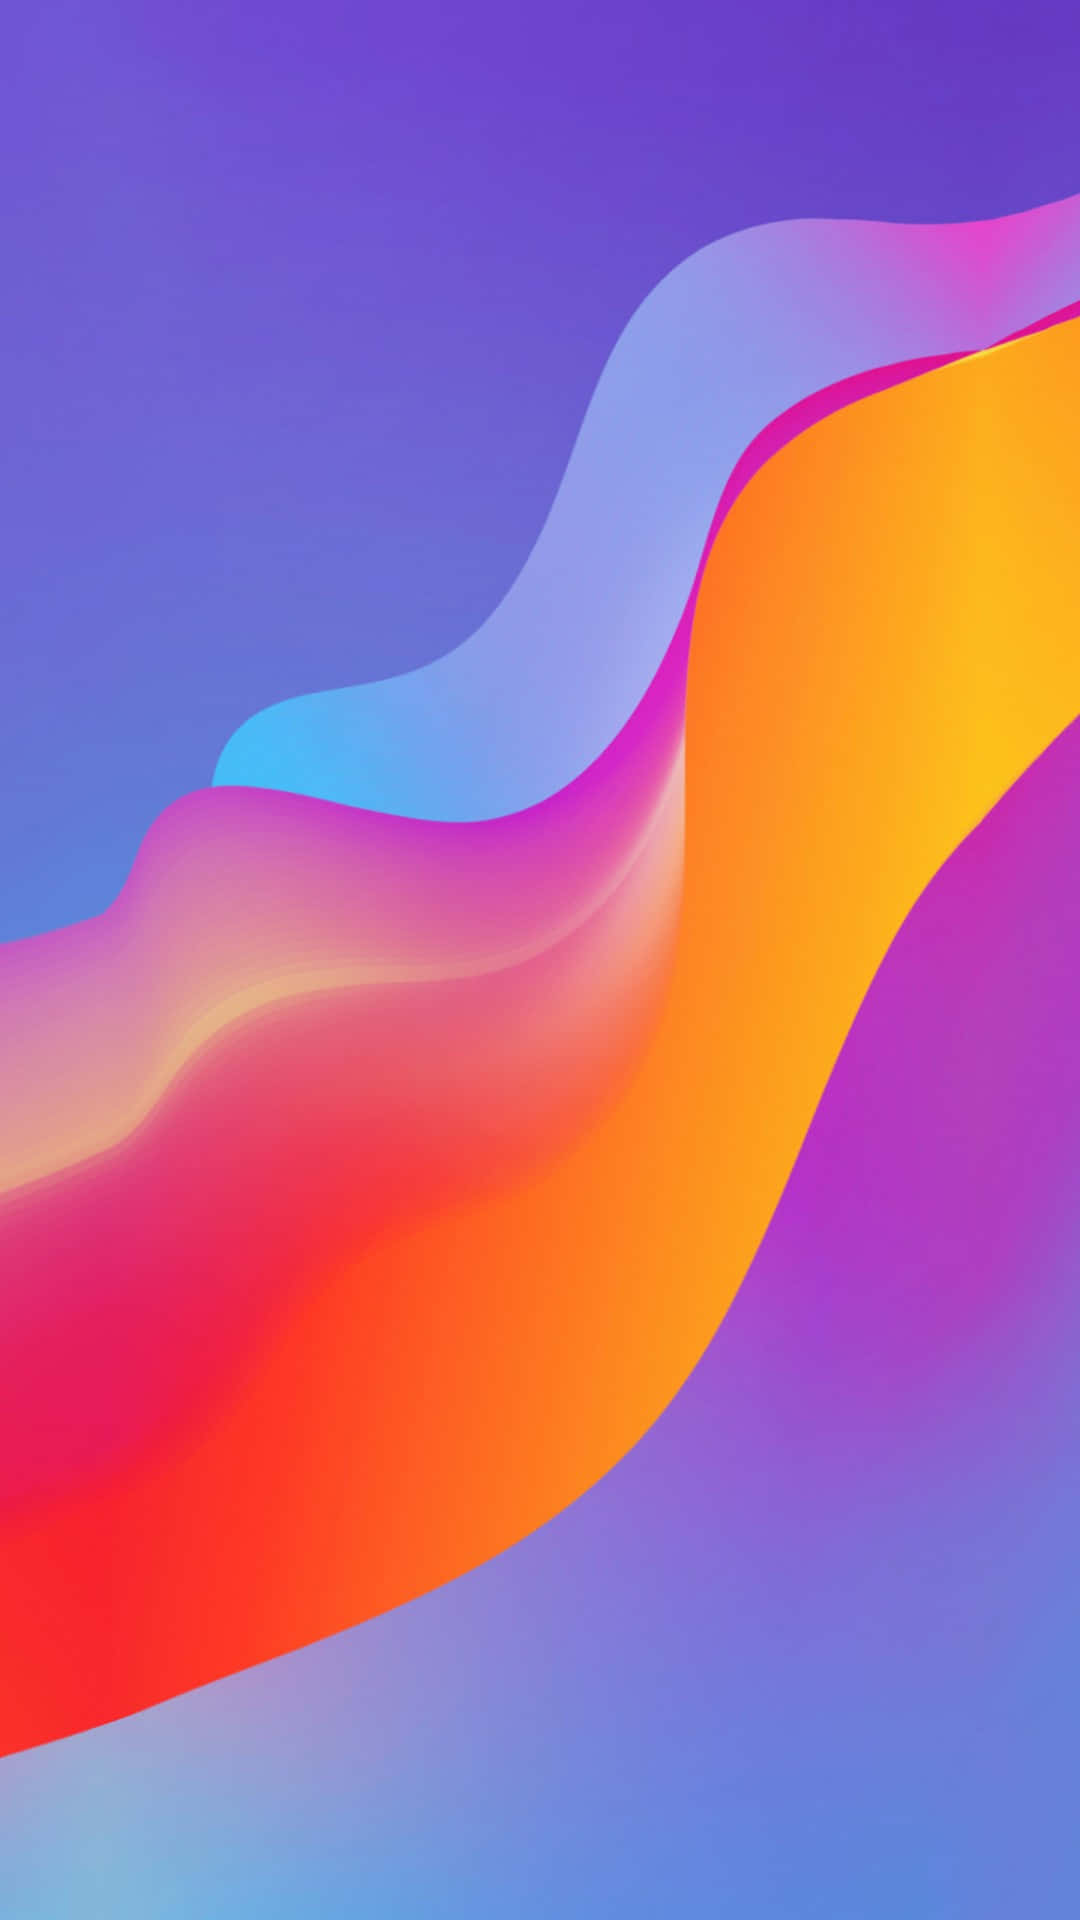 A Colorful Abstract Background With A Wave Wallpaper